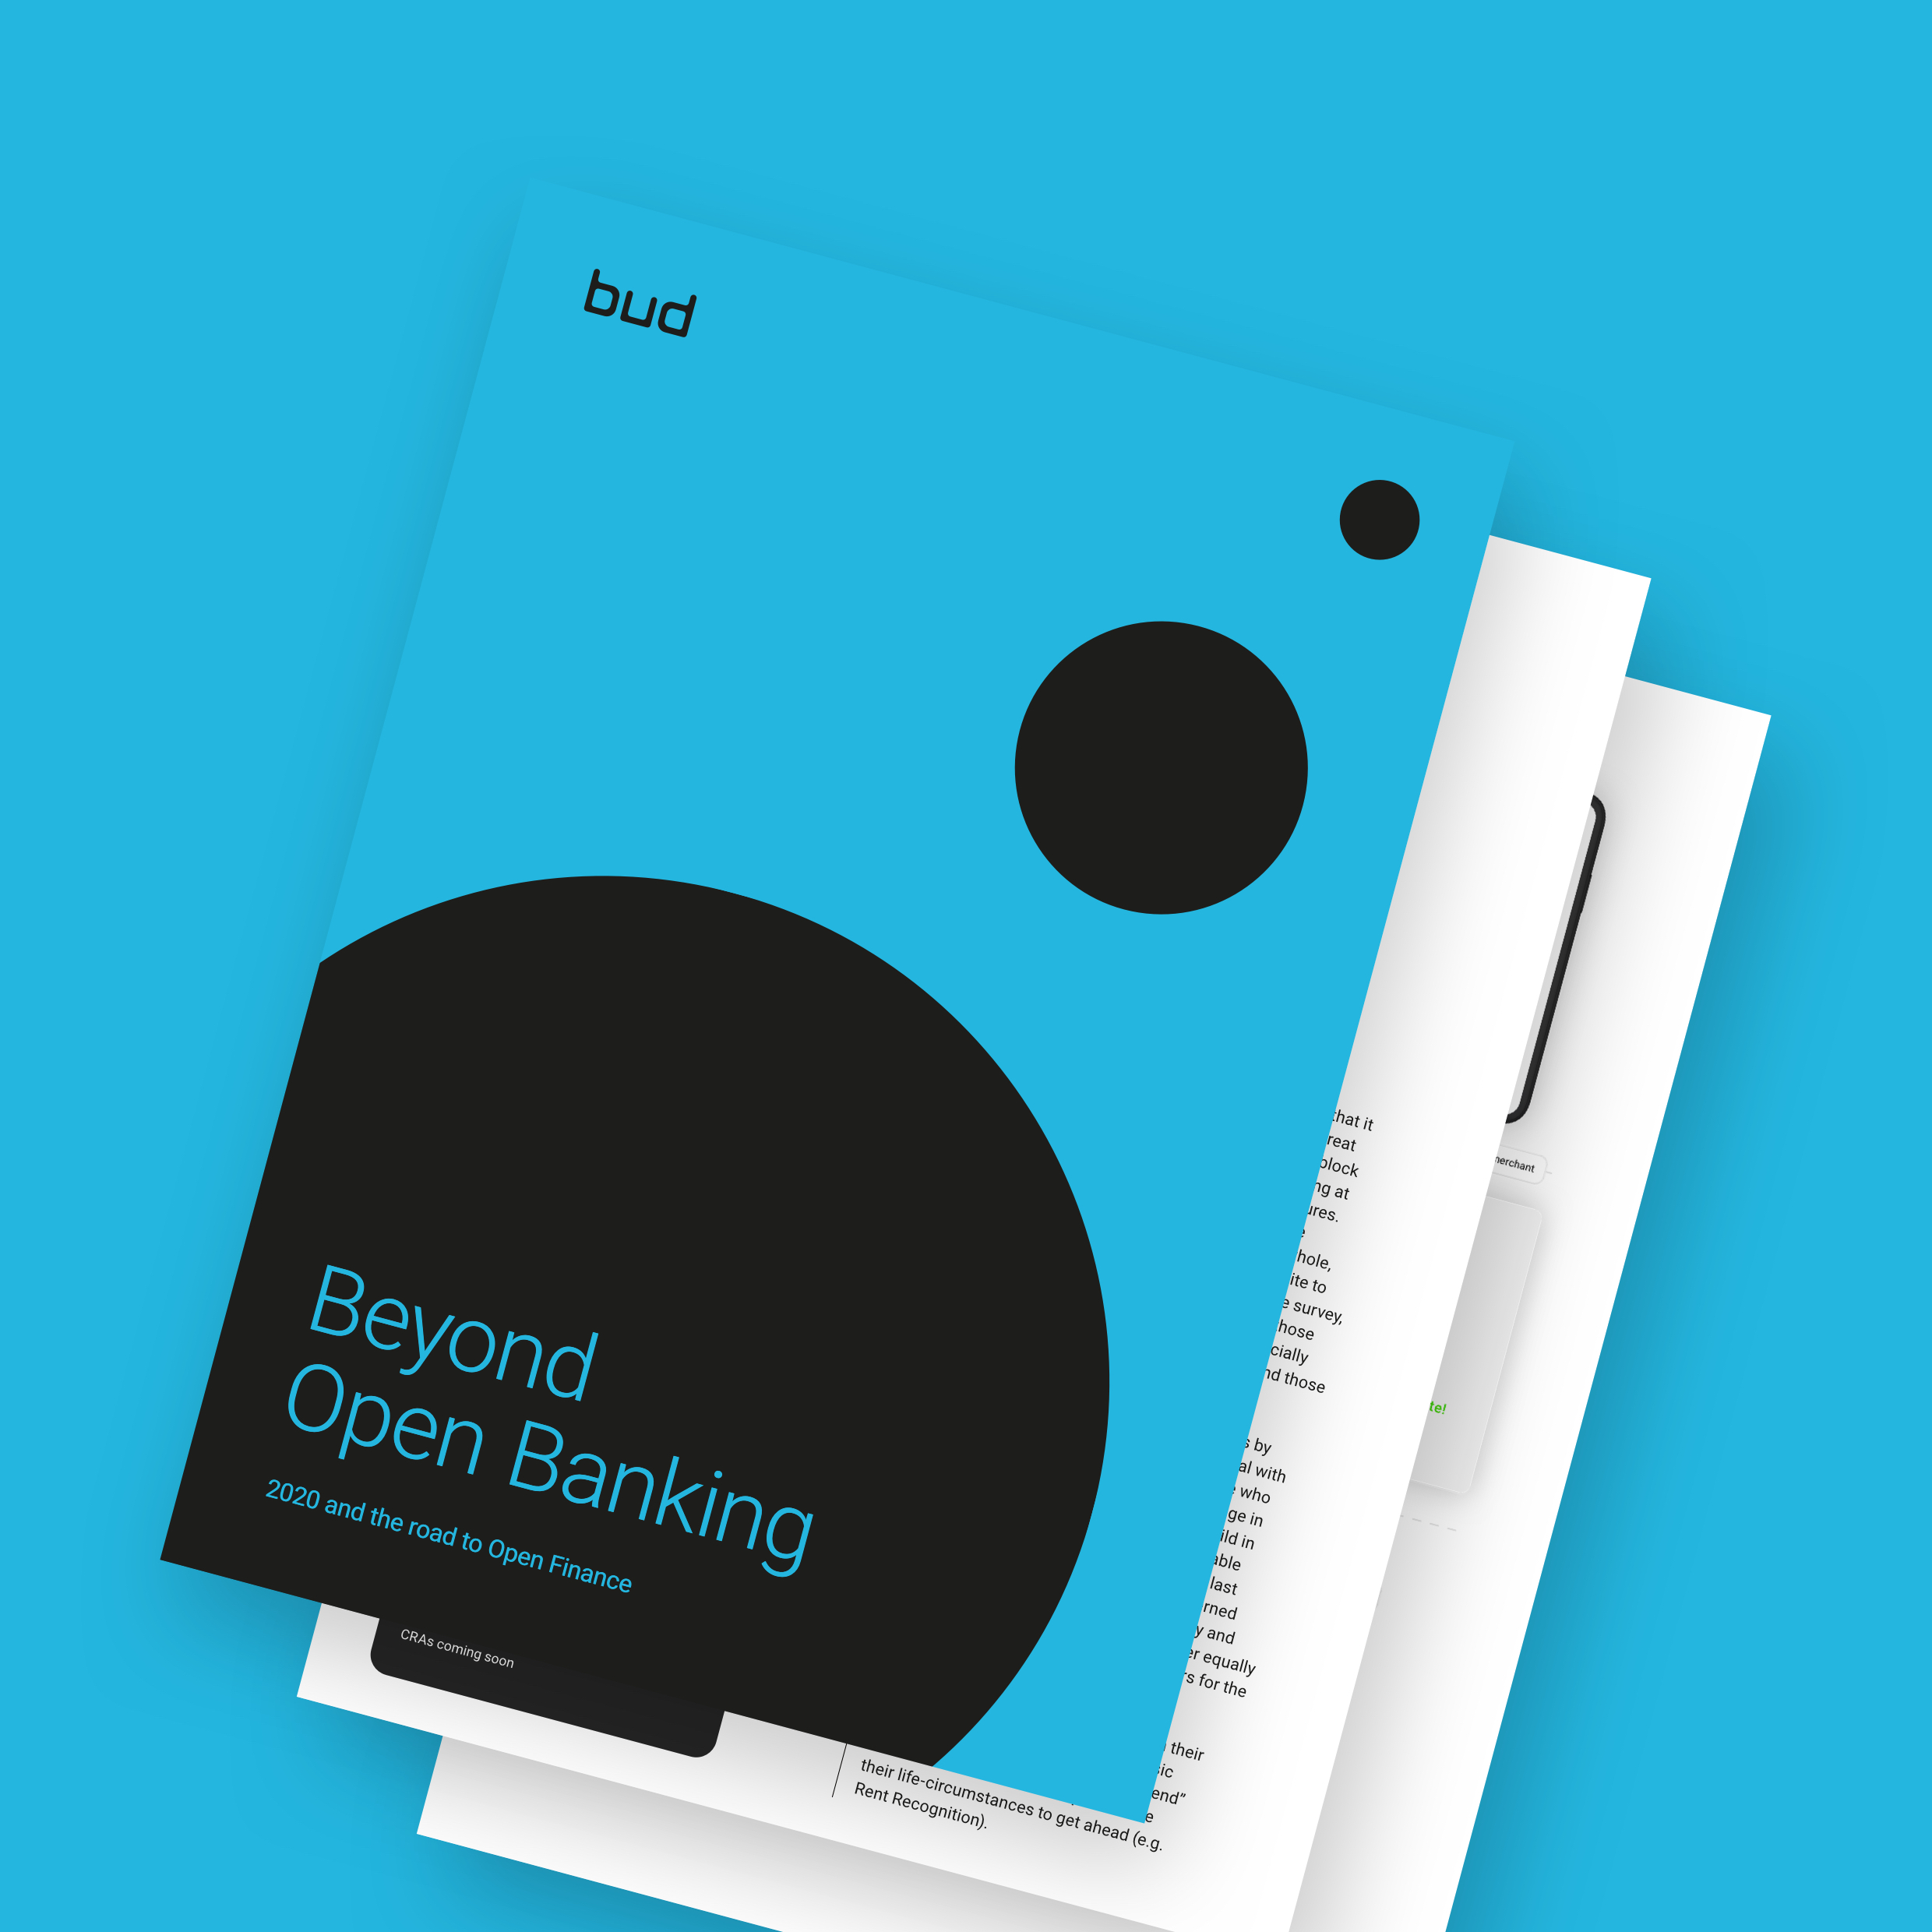 Beyond open banking: 2020 and the road to open finance